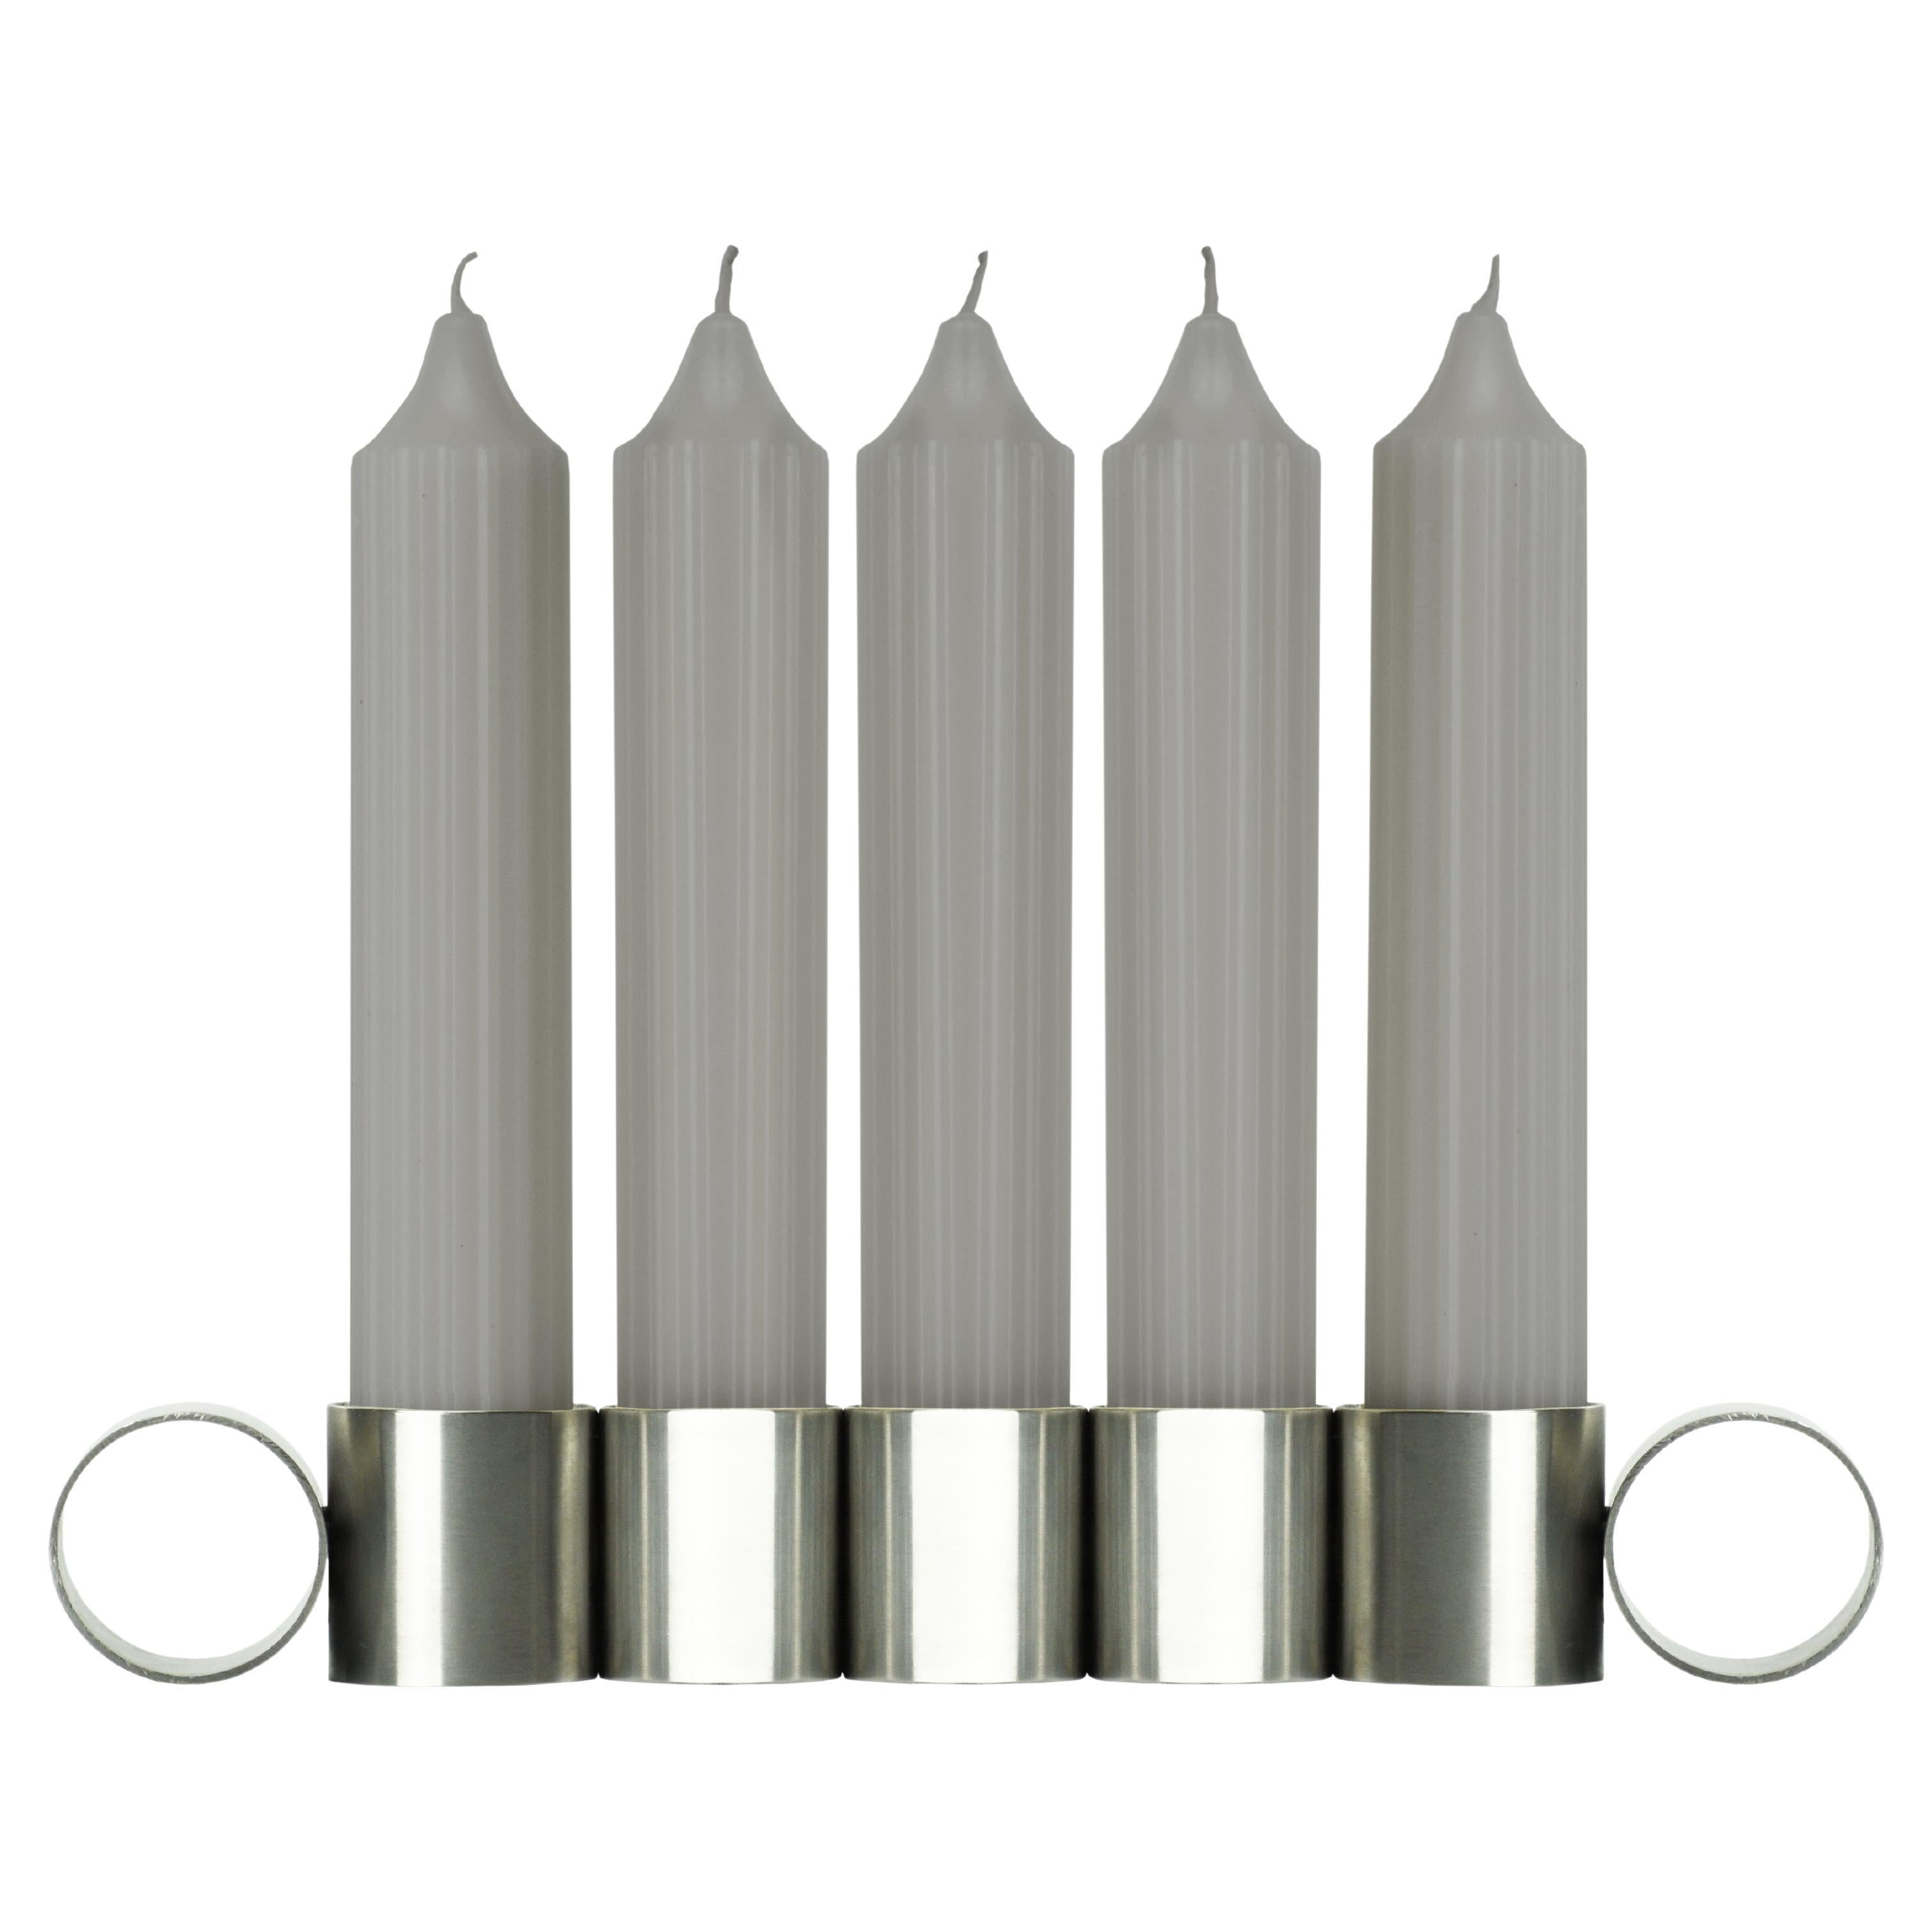 "Tempio Del Tempo N°5" Stainless Steel Candleholder and Glass Vase by COKI For Sale